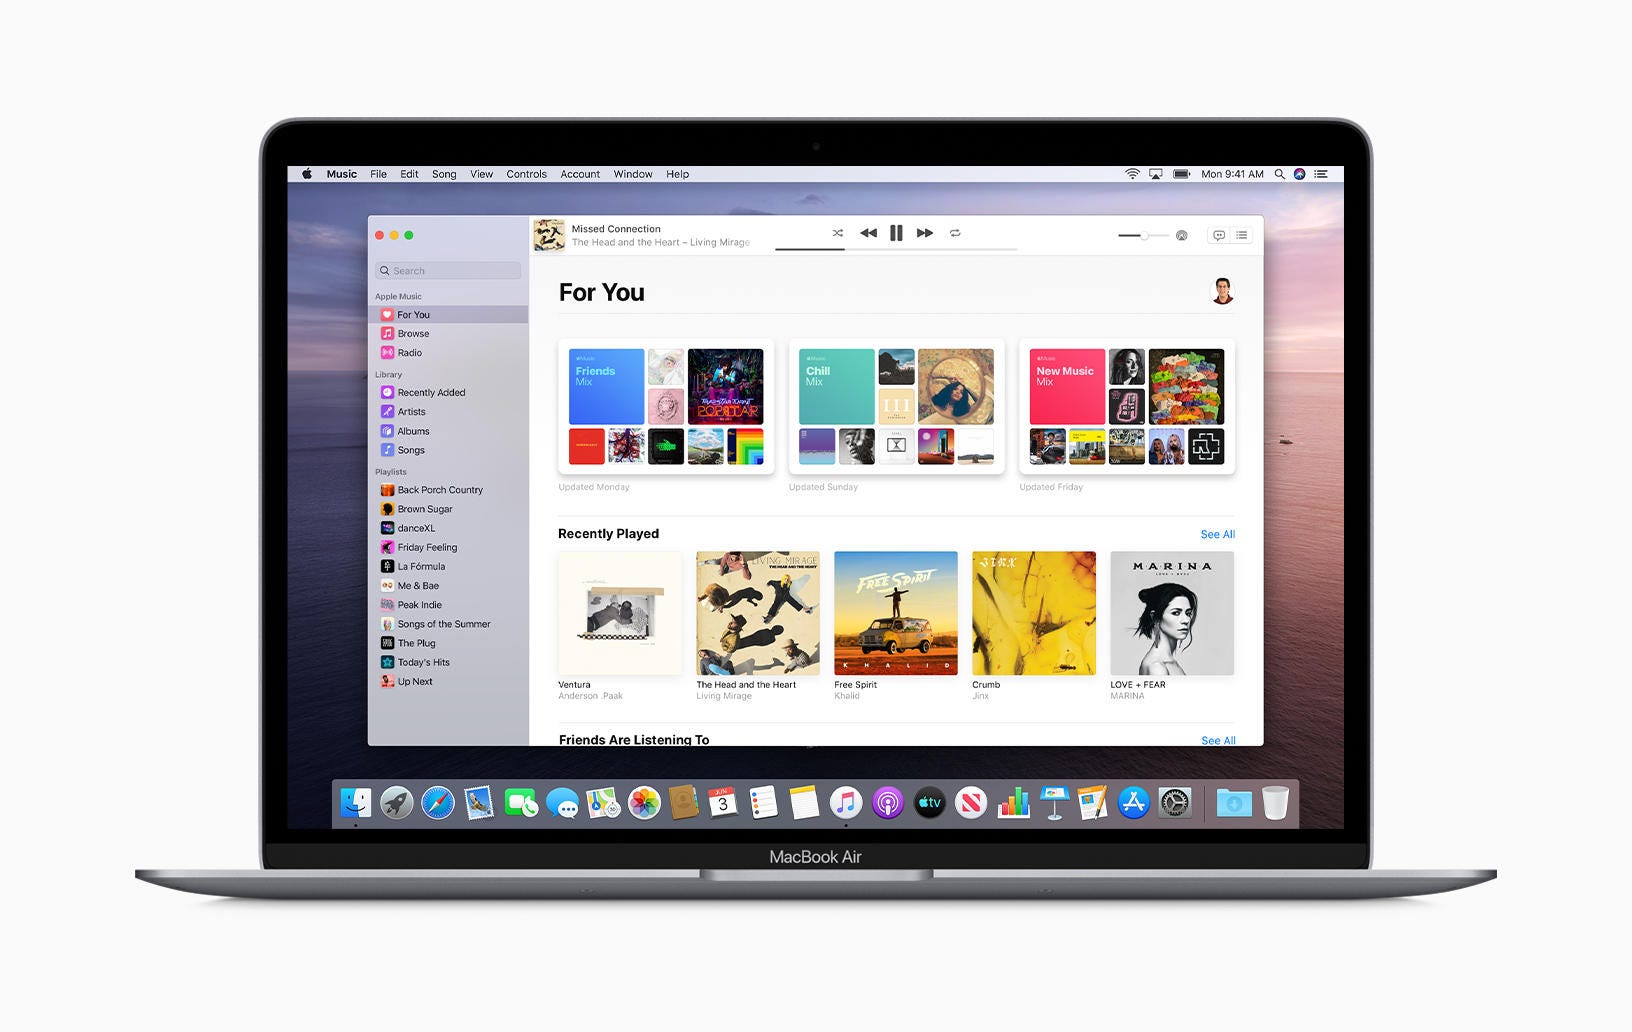 Don’t mourn for iTunes. Here’s how to now listen to music on MacOS